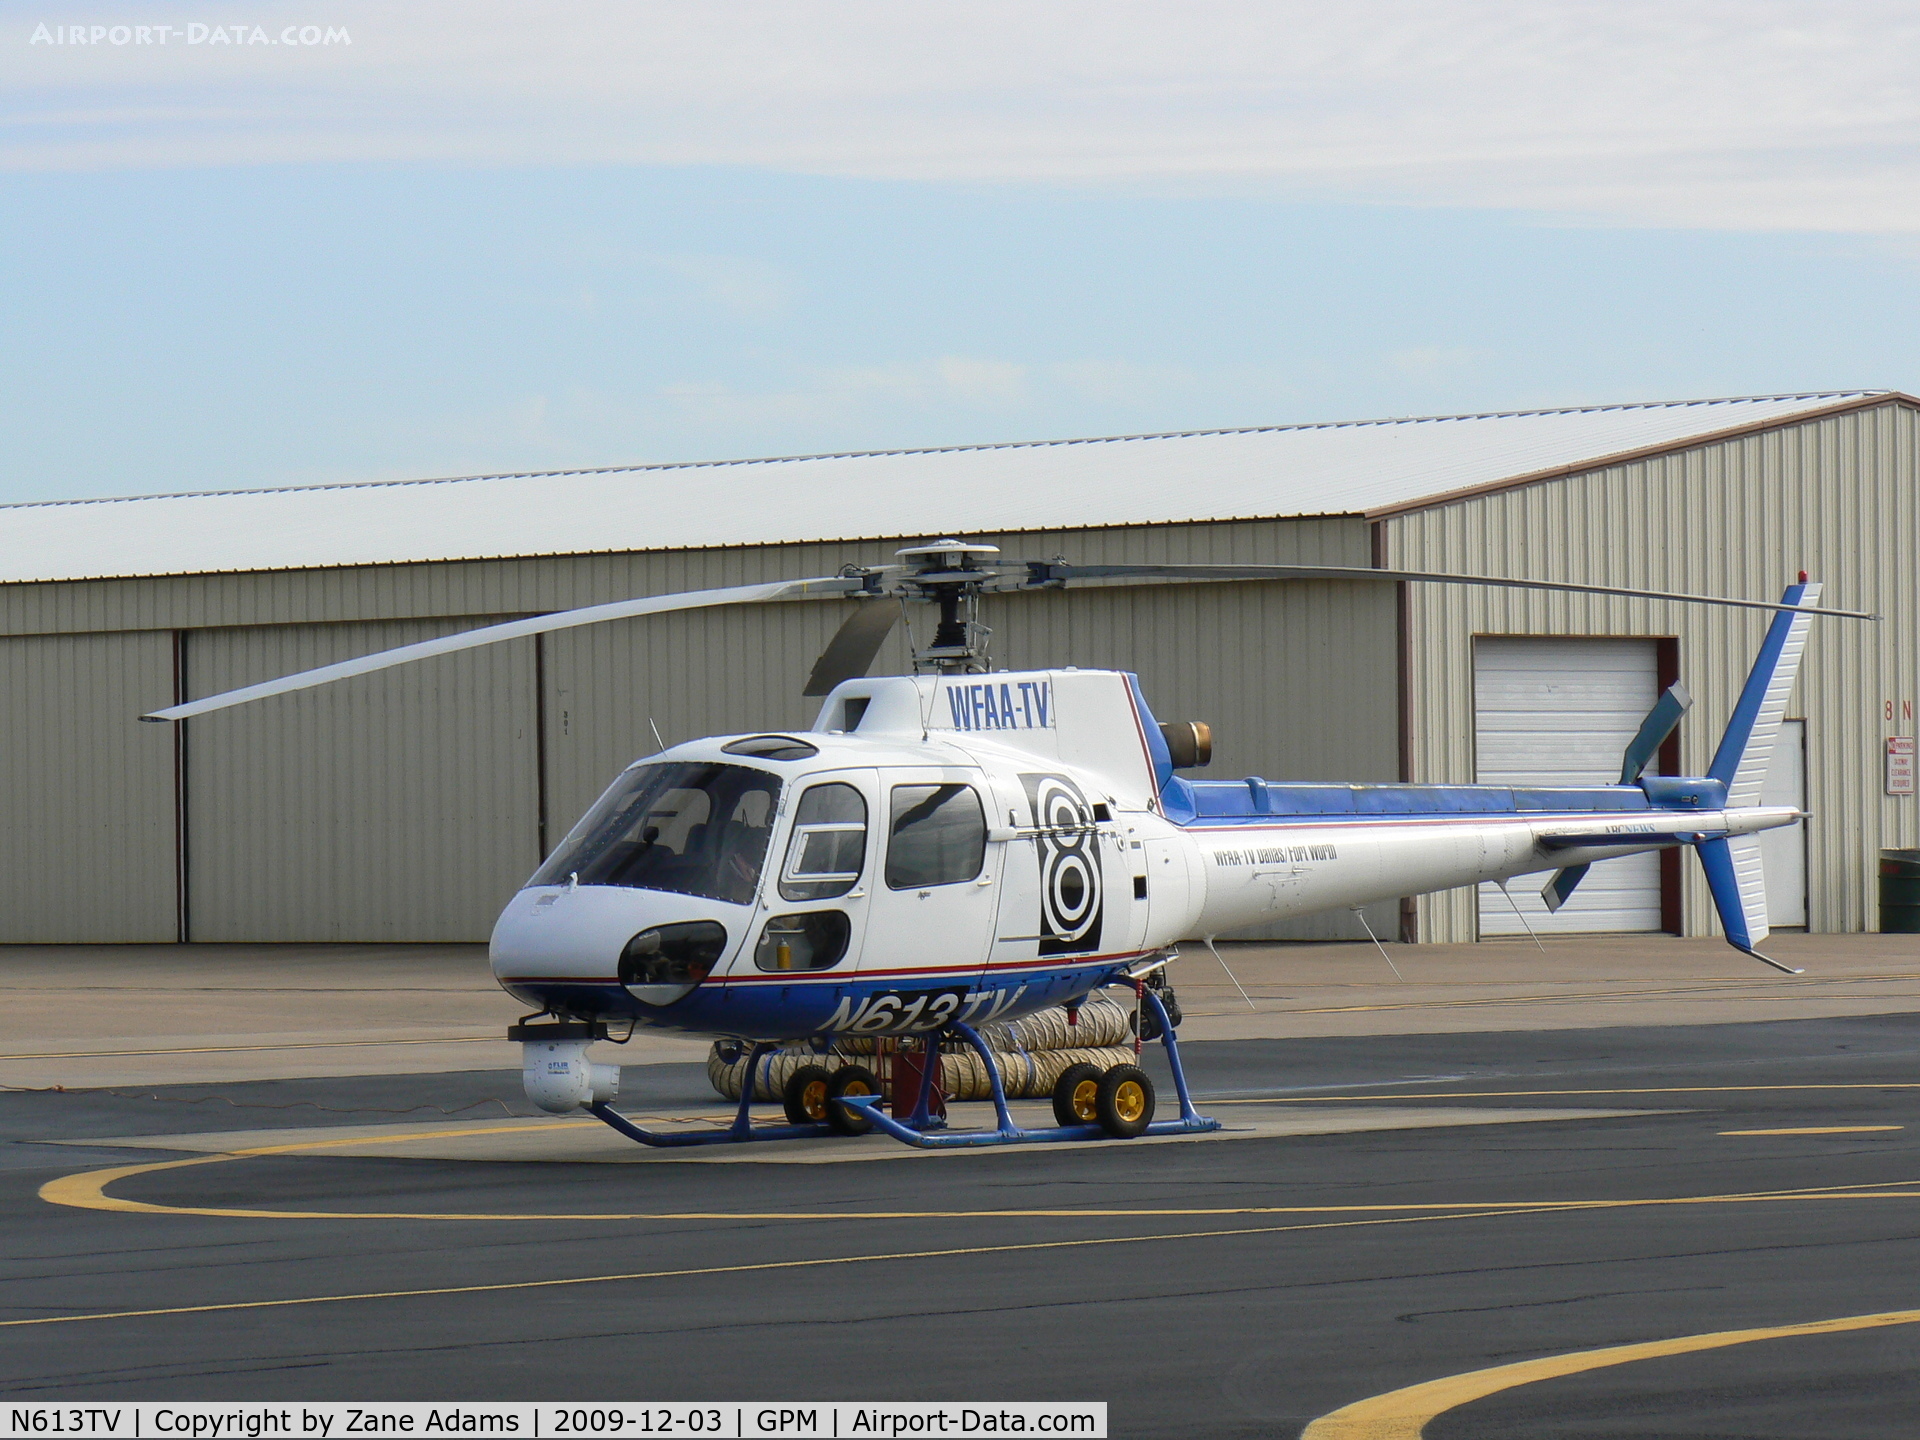 N613TV, 2007 Eurocopter AS-350B-2 Ecureuil Ecureuil C/N 4291, Former ABC Channel 8 WFAA news helicopter. Swapped numbers with N8TV - confused?